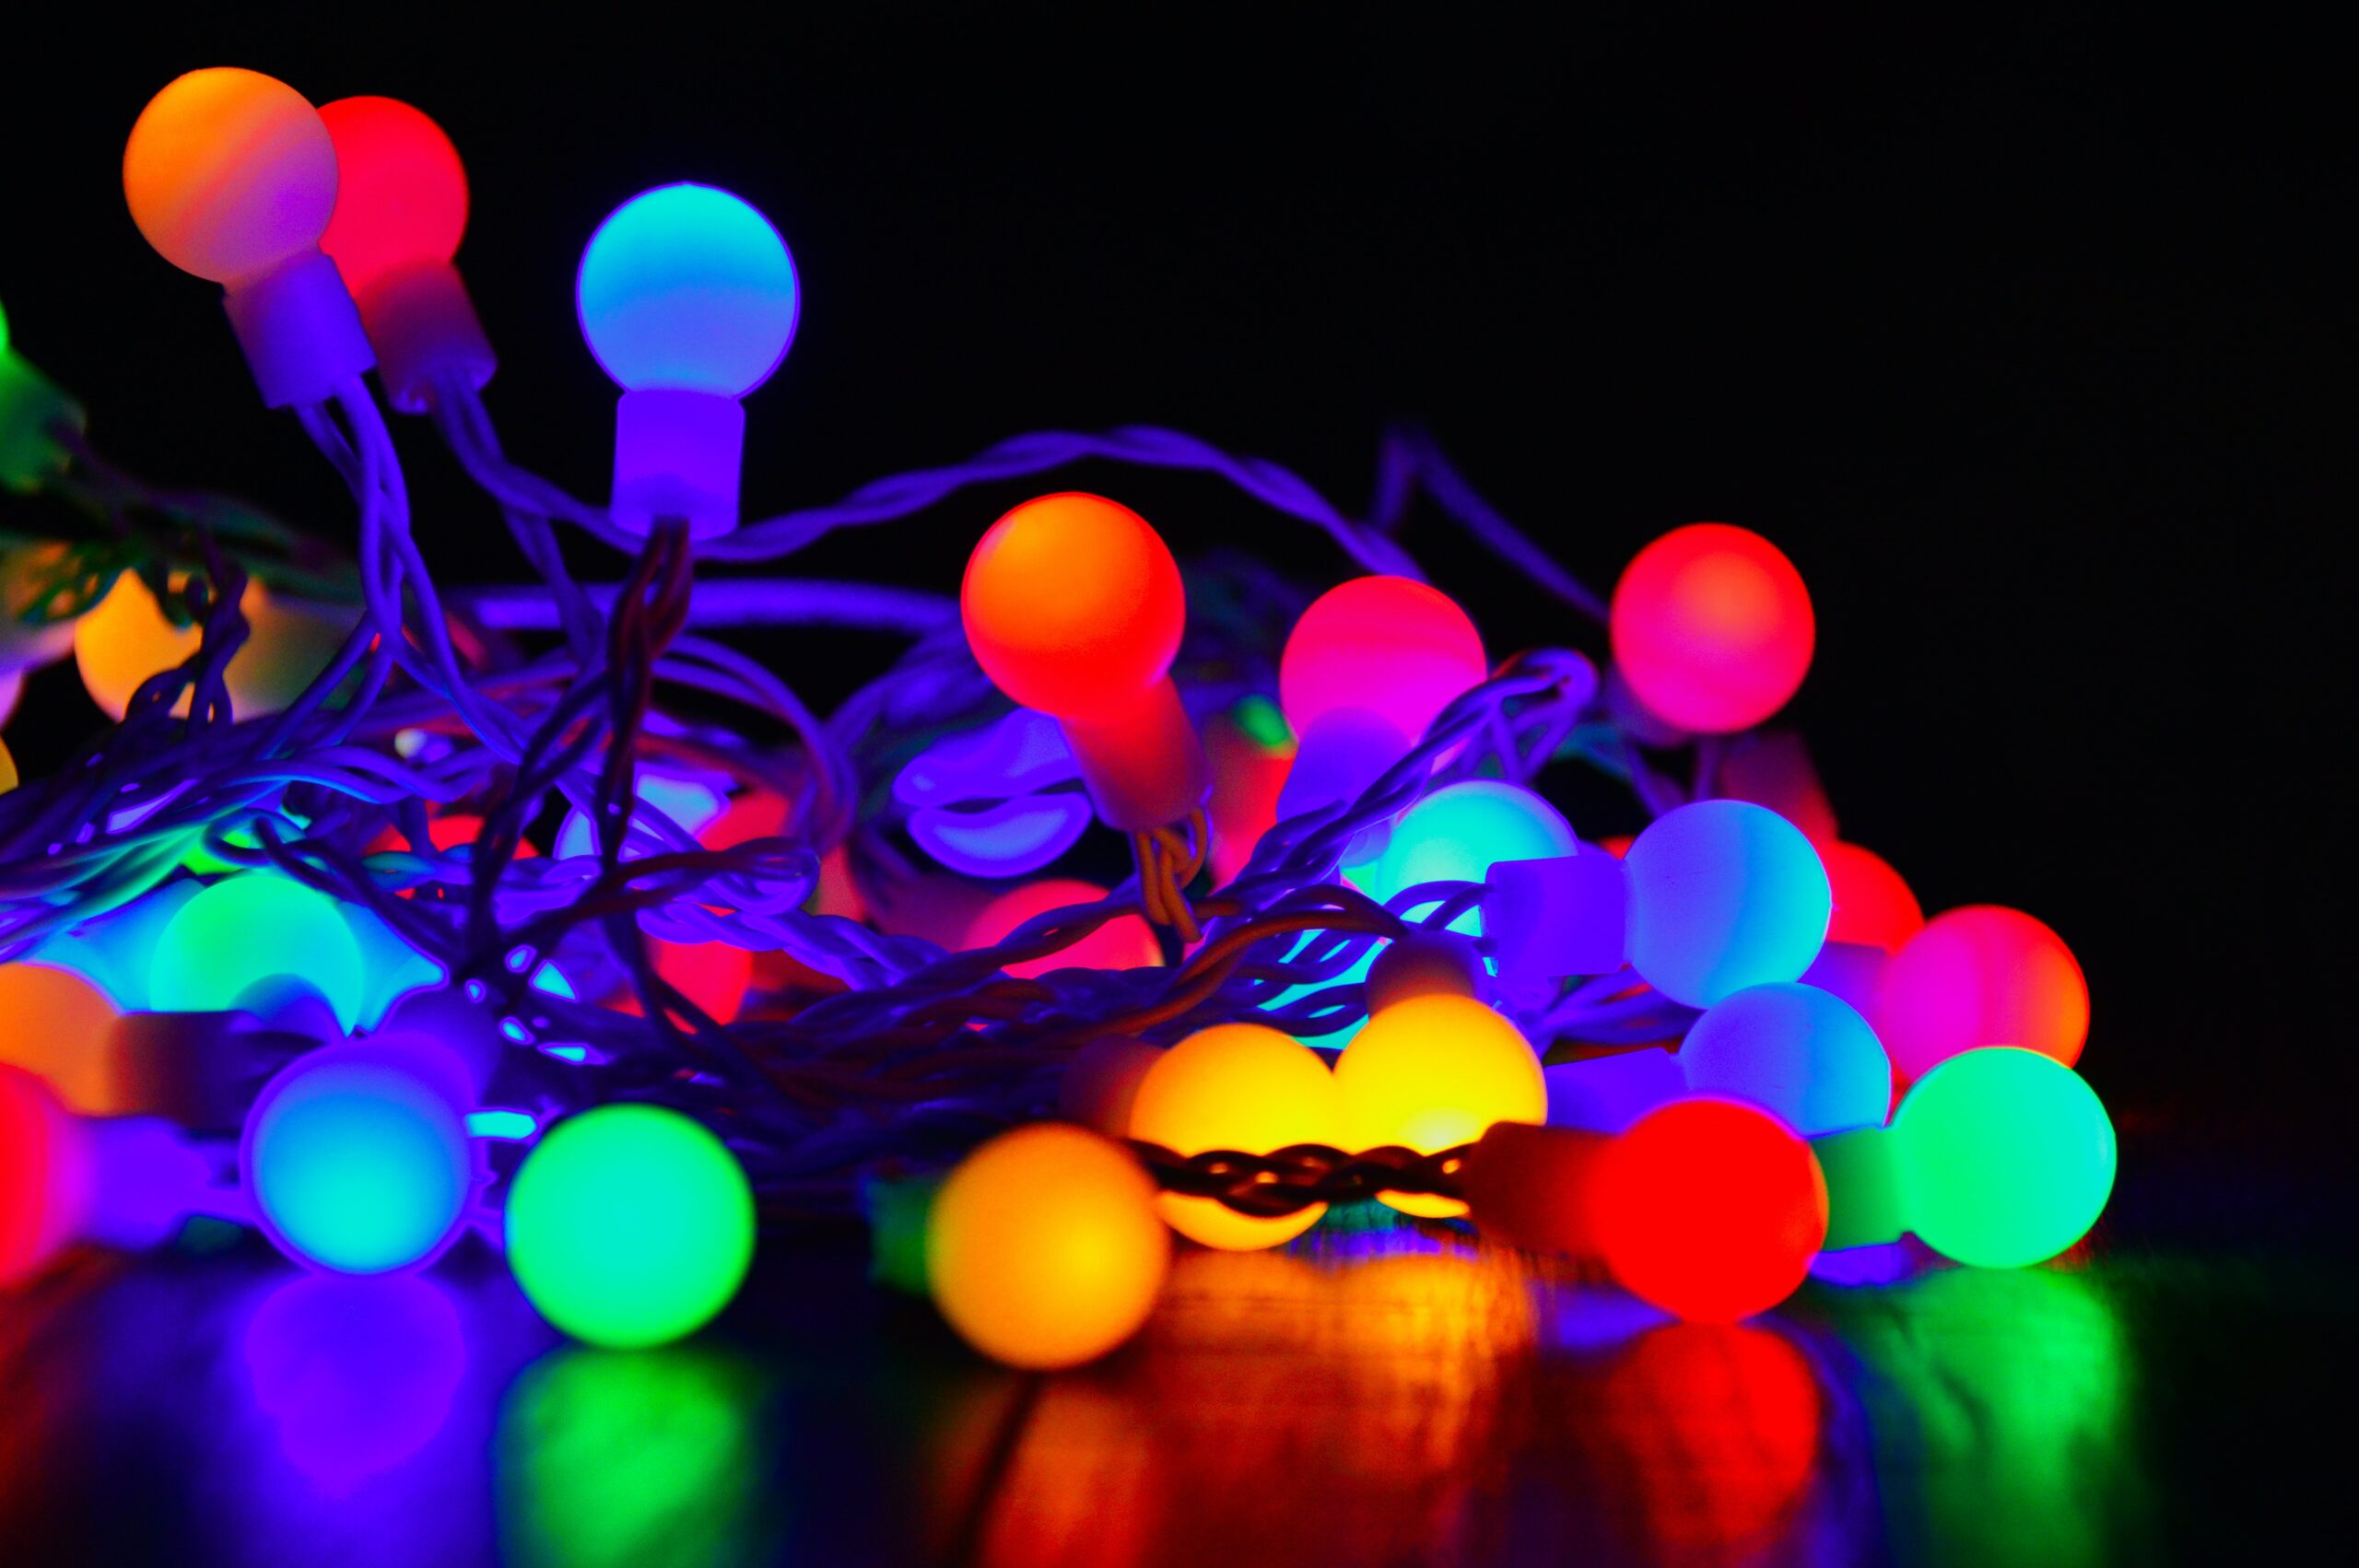 A string of brightly coloured lights